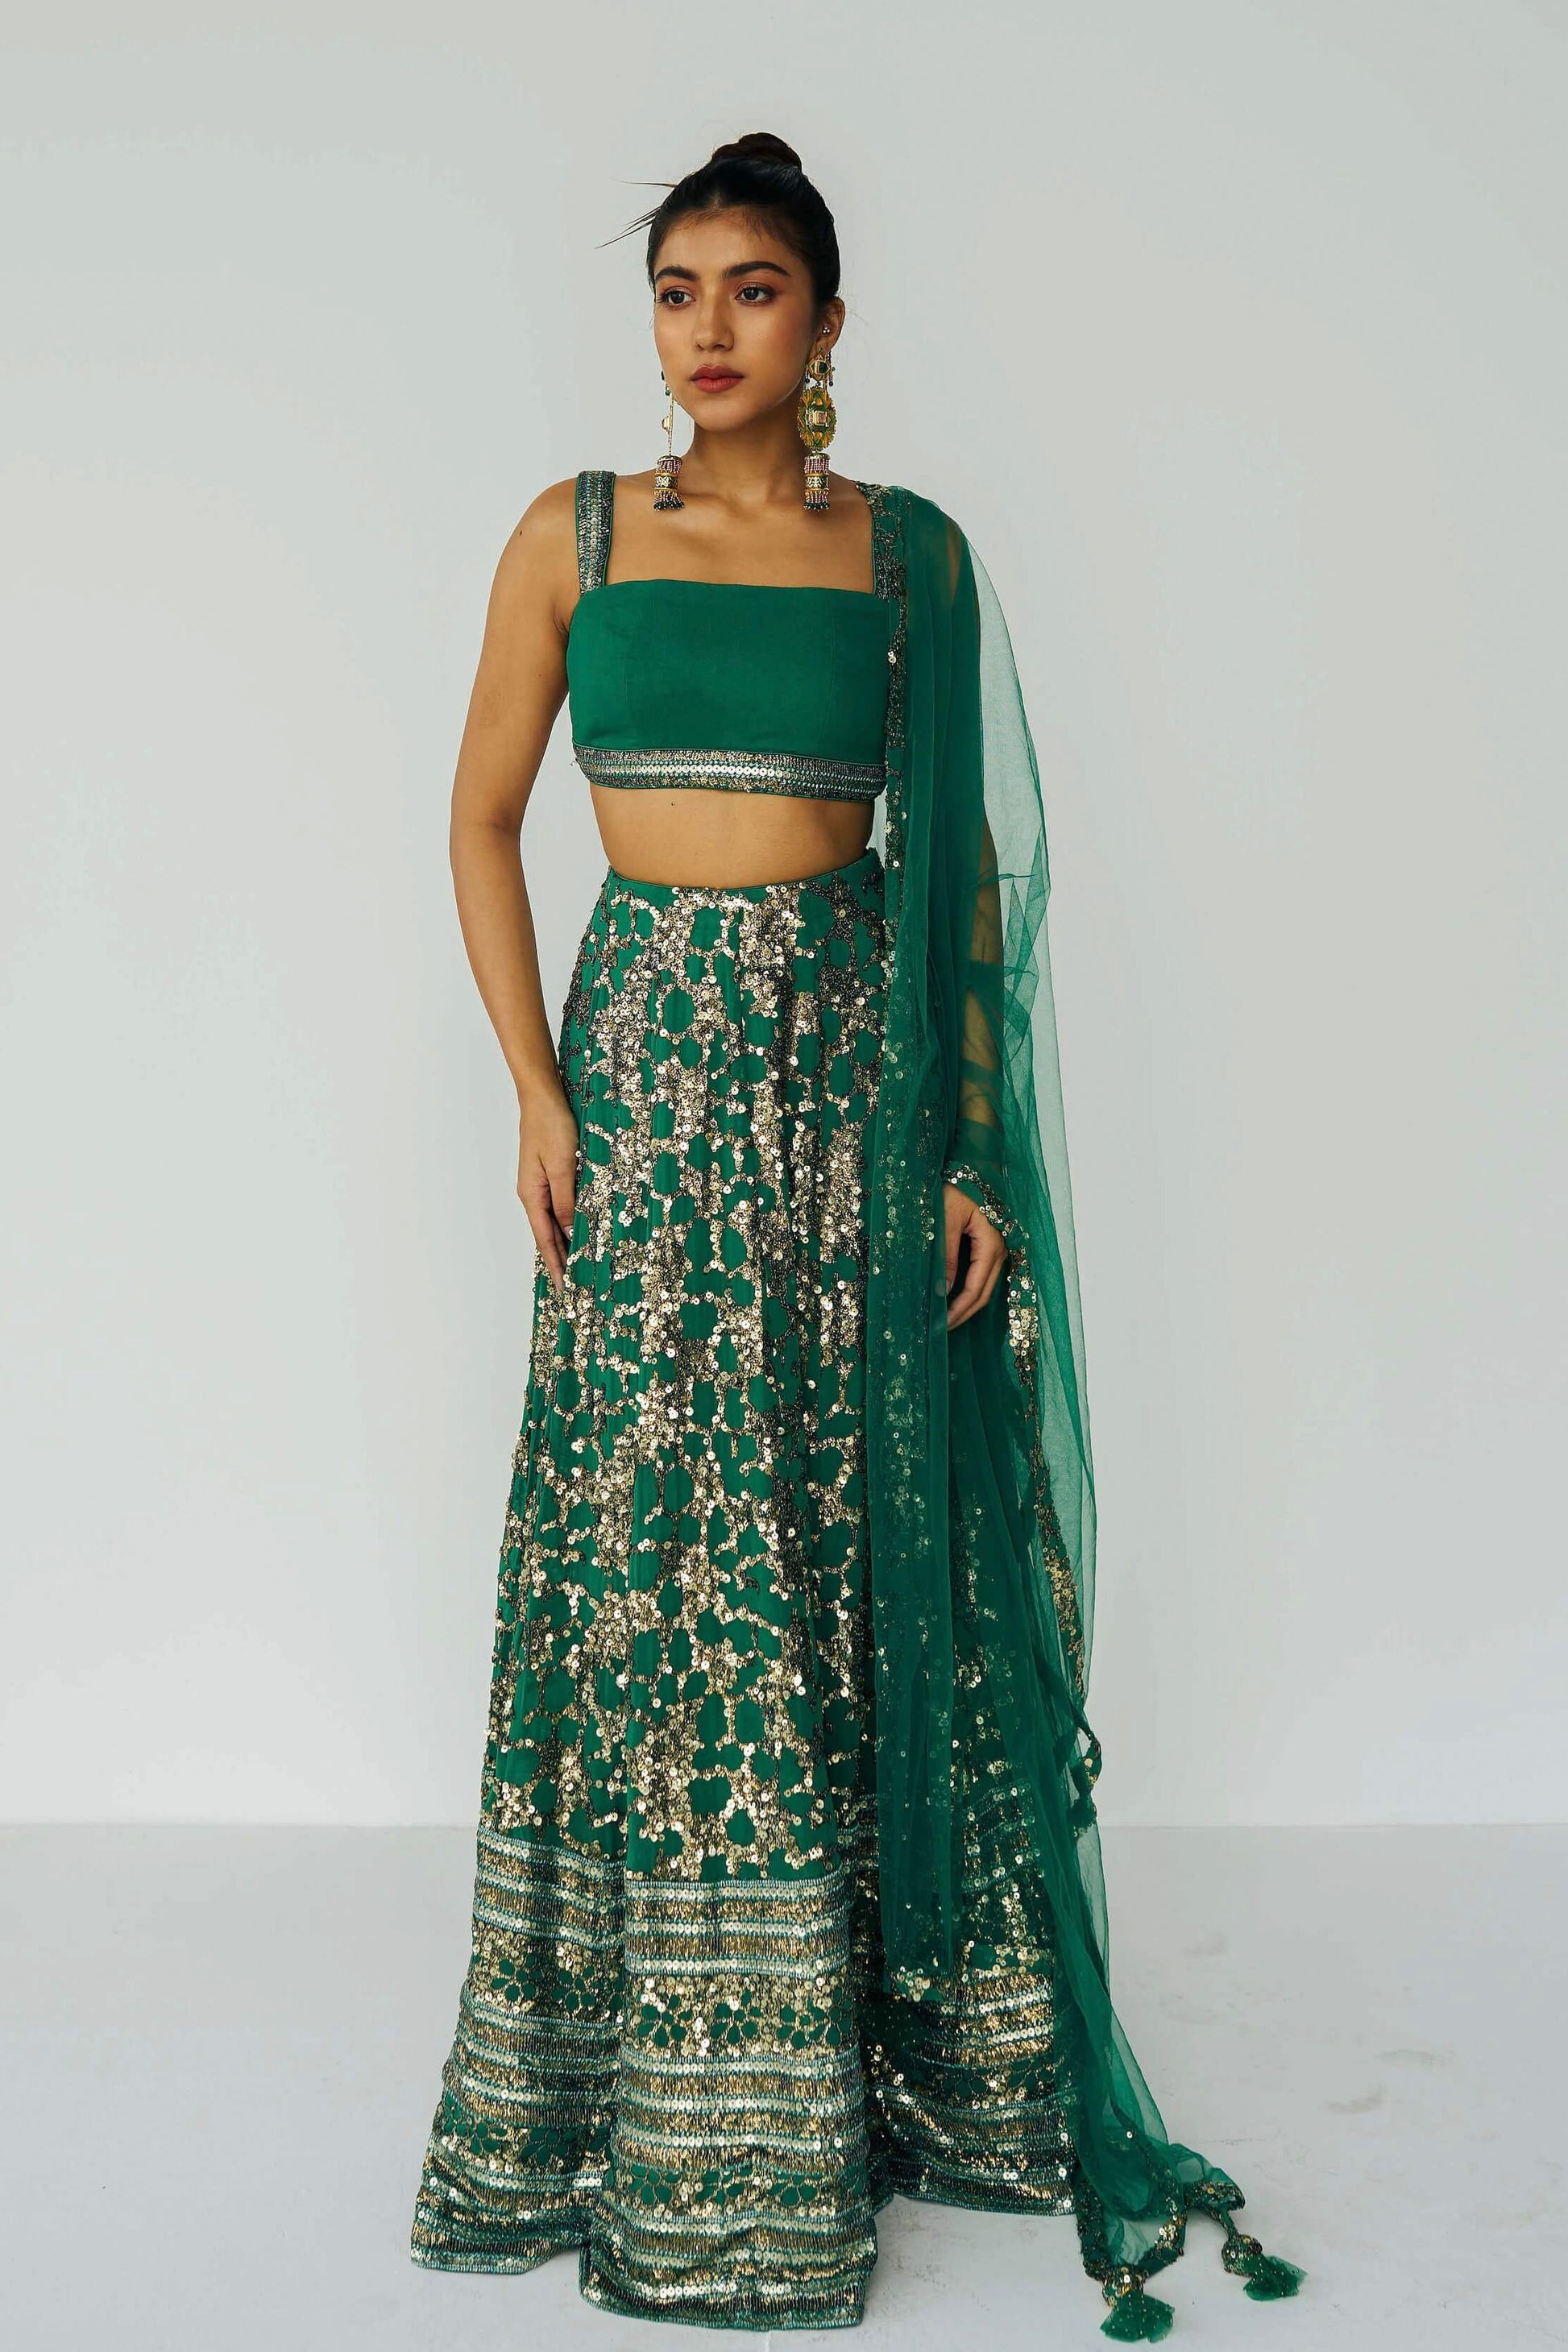 The Detachable Lehenga features a sequin-adorned skirt, criss-cross back blouse, a and delicate net dupatta. With a removable portion, it effortlessly transforms into a shorter skirt for a night of dancing.